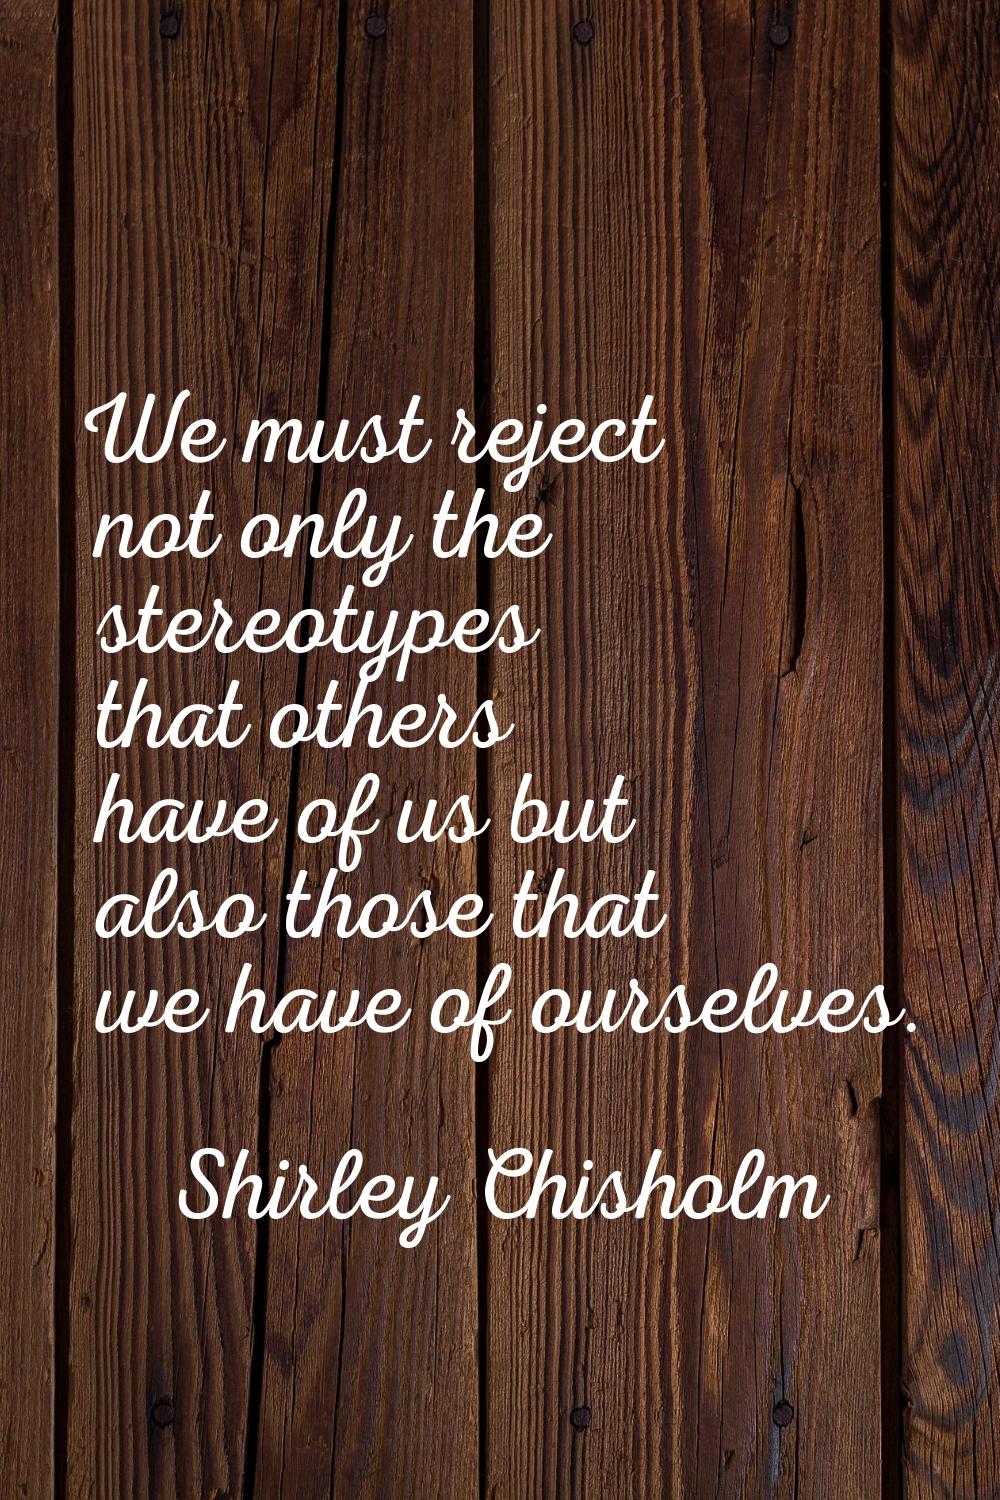 We must reject not only the stereotypes that others have of us but also those that we have of ourse